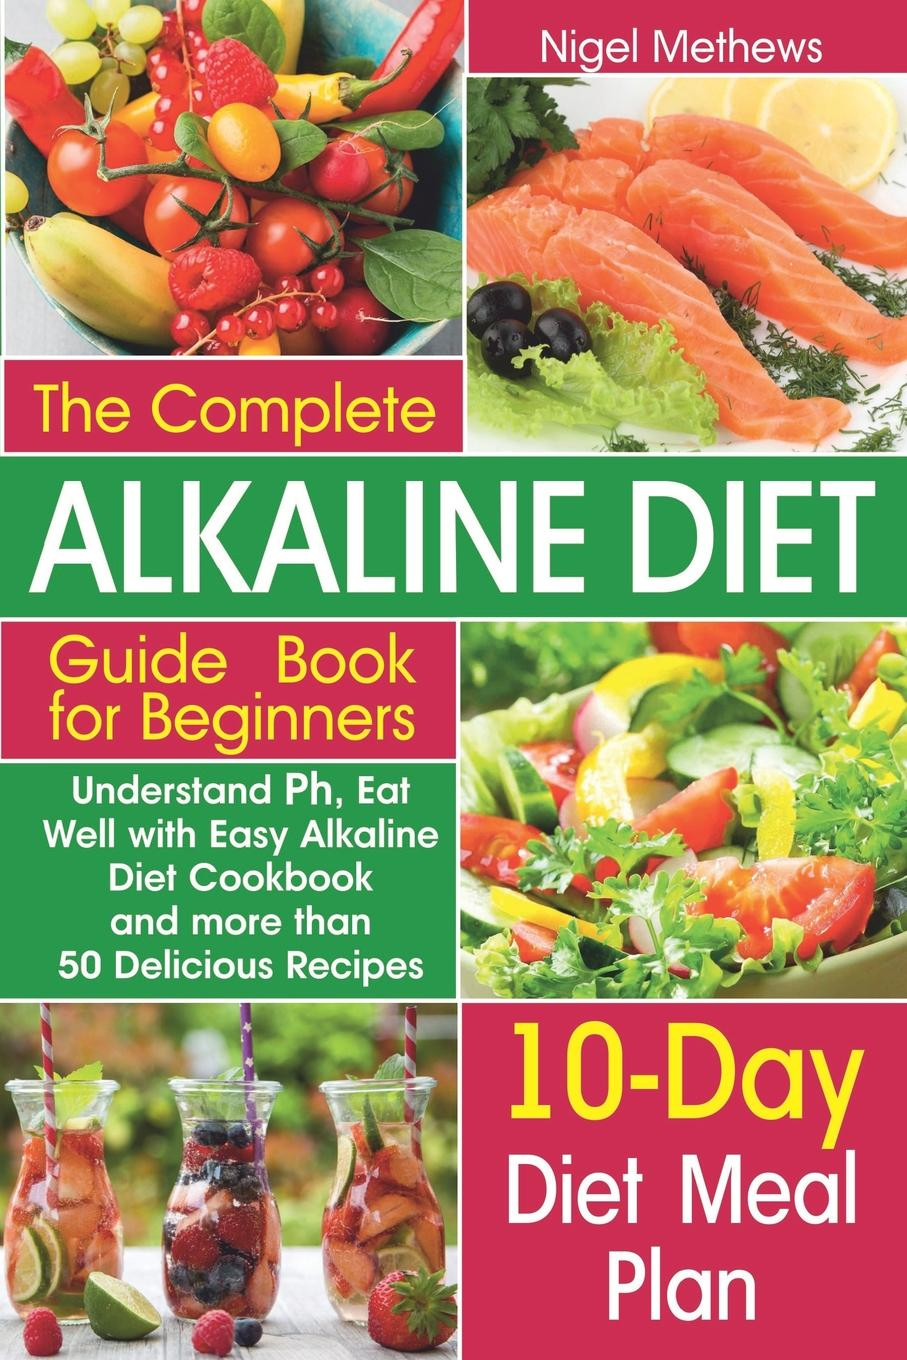 The Complete Alkaline Diet Guide Book For Beginners 